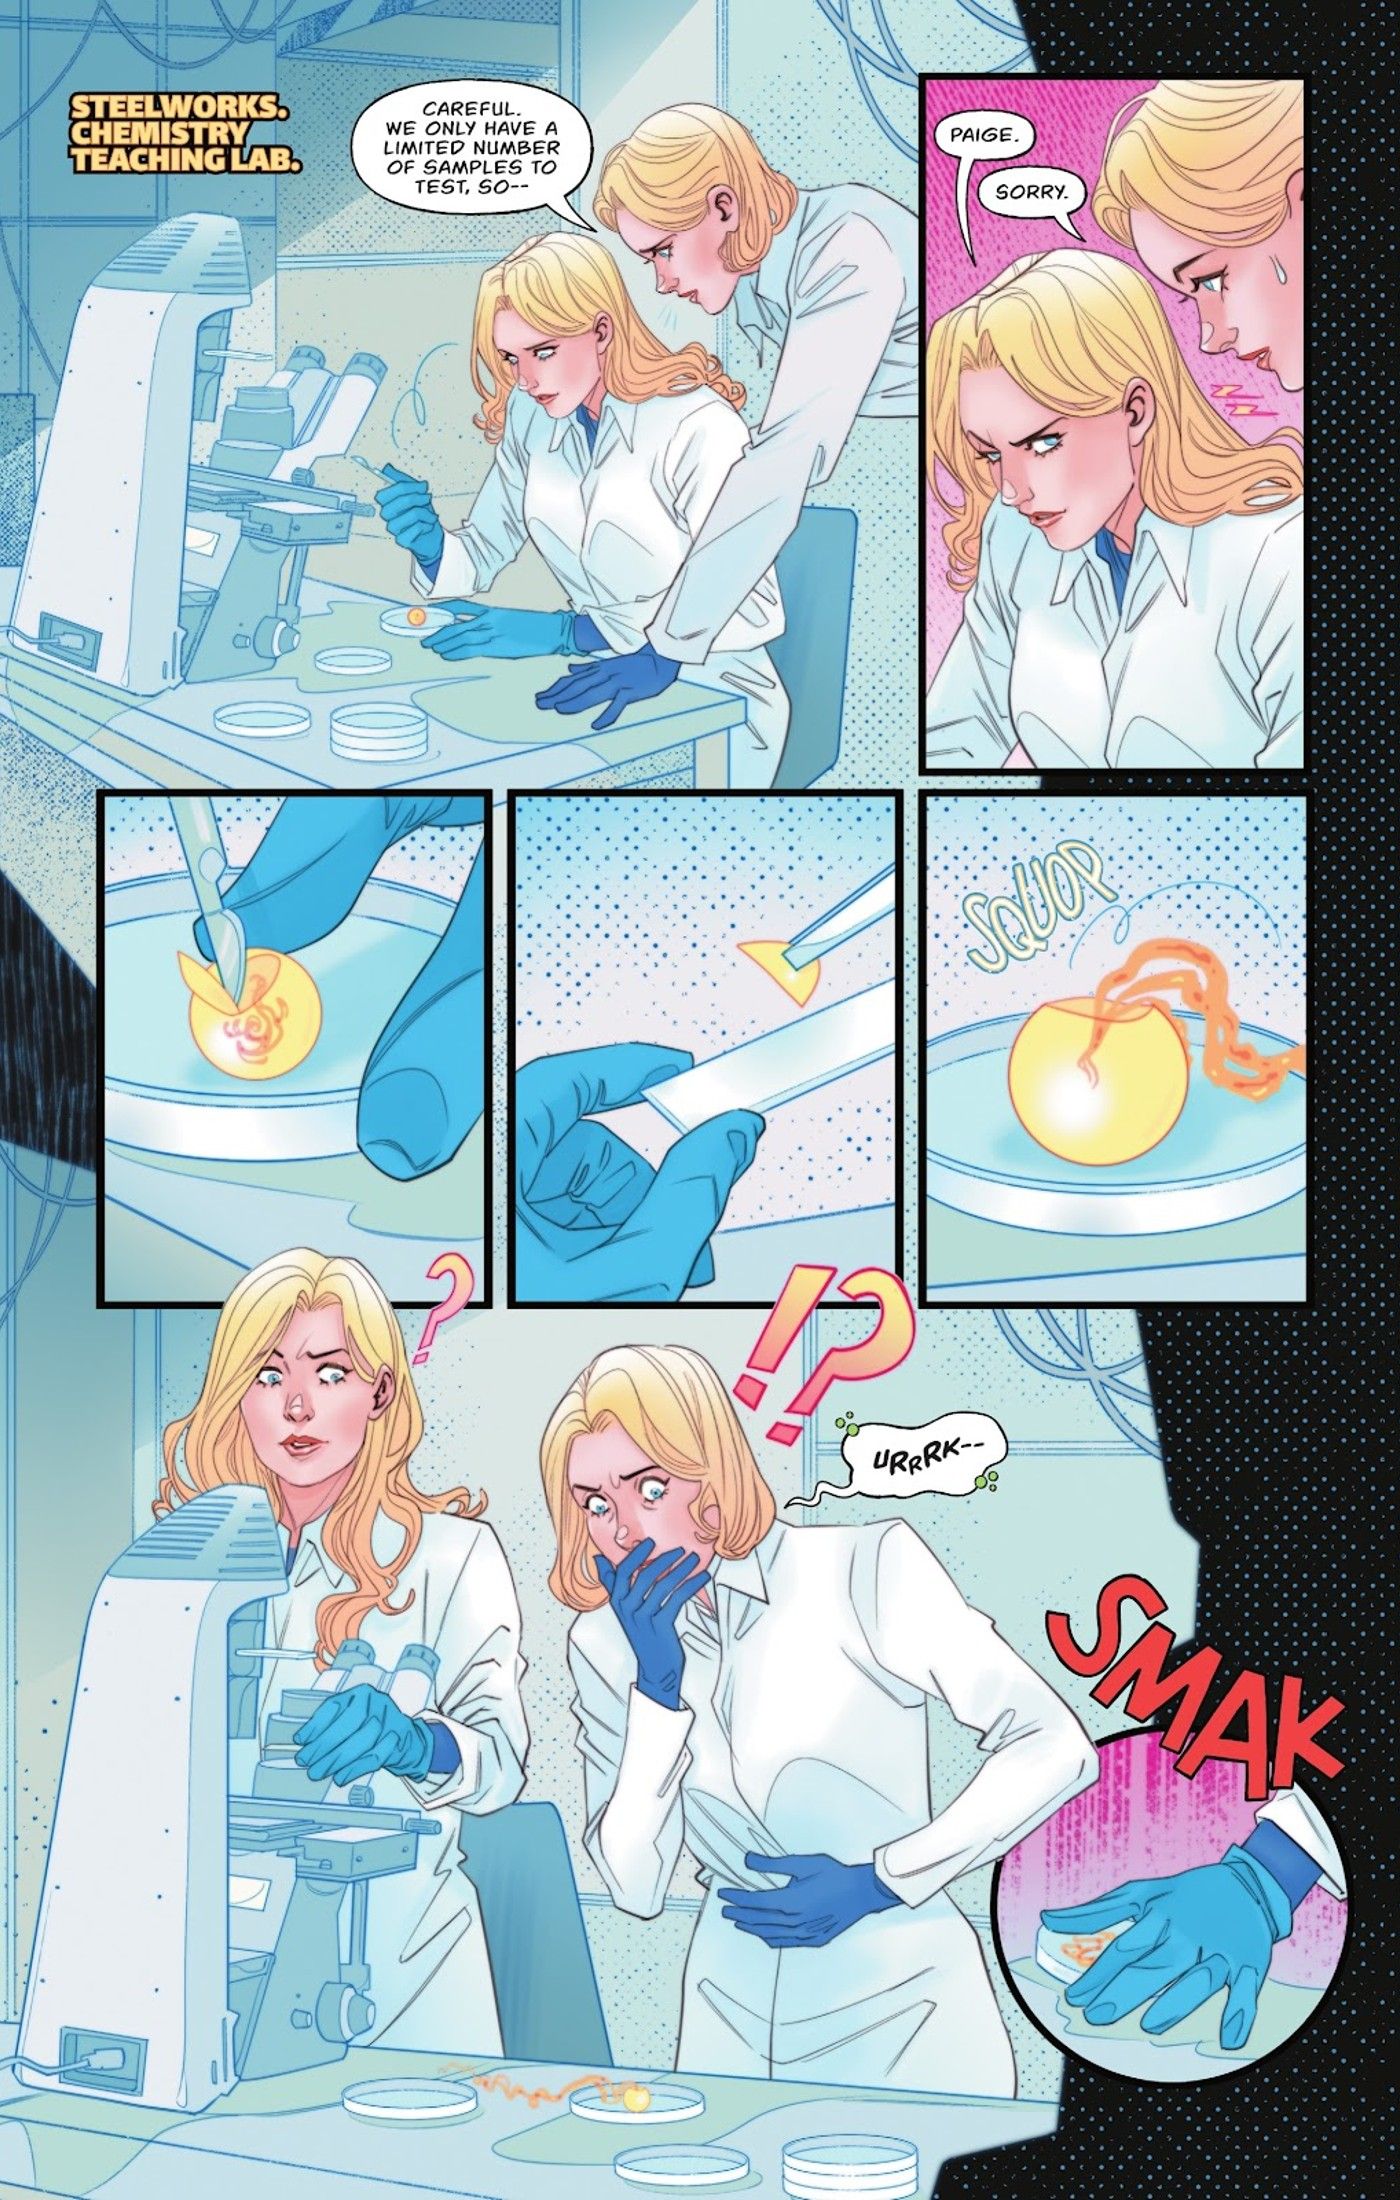 Women in STEM: Supergirl & Power Girl Unite as DC’s Smartest Duo (Who Can Also Throw a Super-Punch)